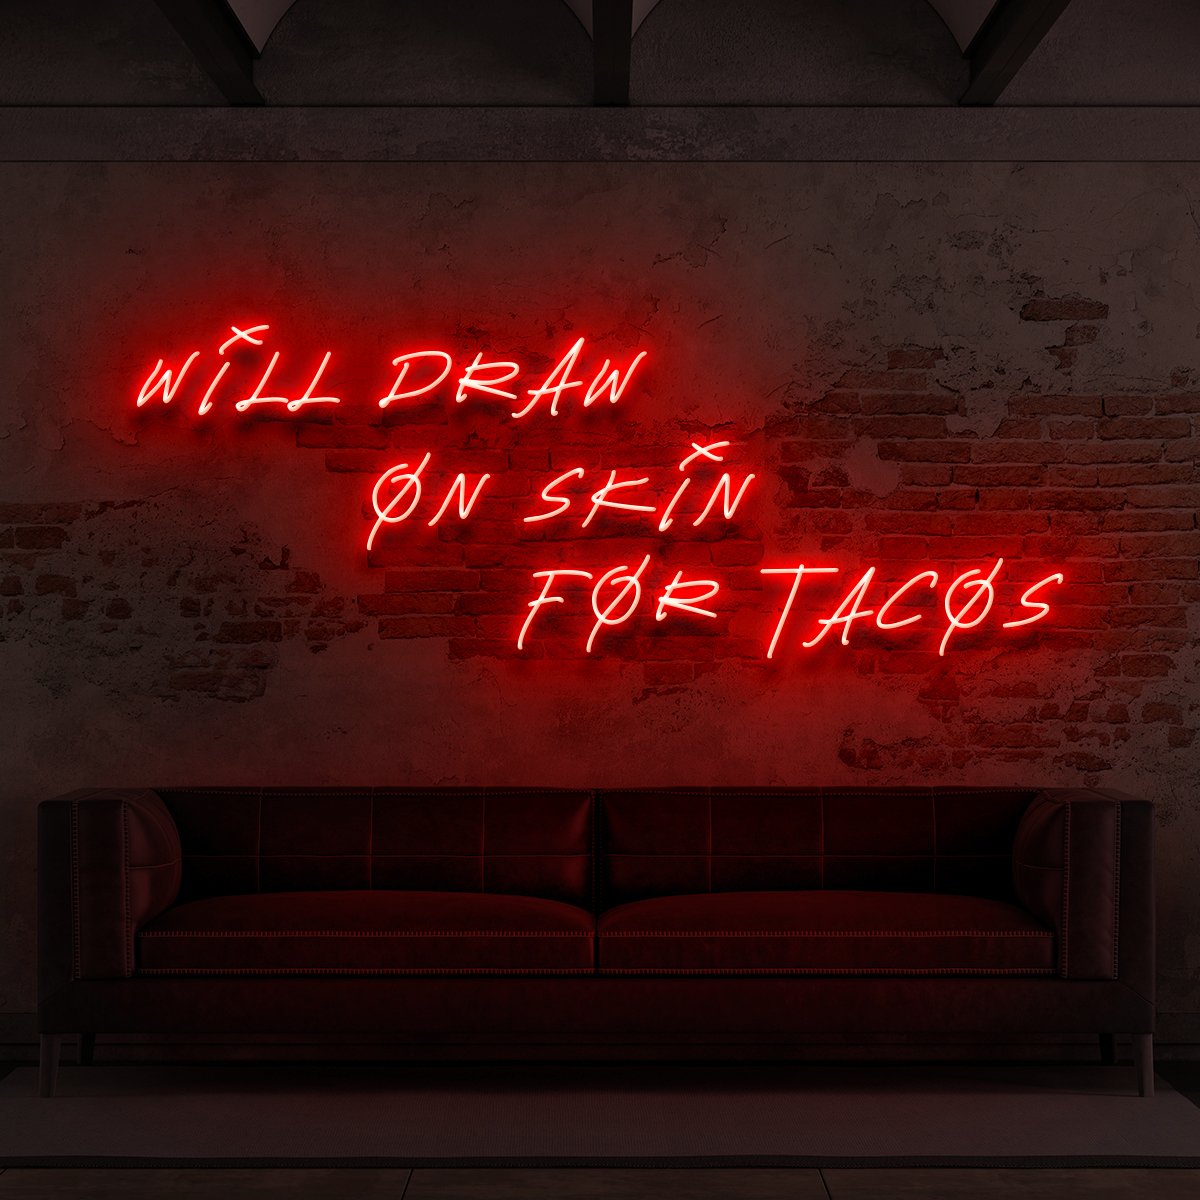 "Will Draw On Skin For Tacos" Neon Sign for Tattoo Parlours by Neon Icons